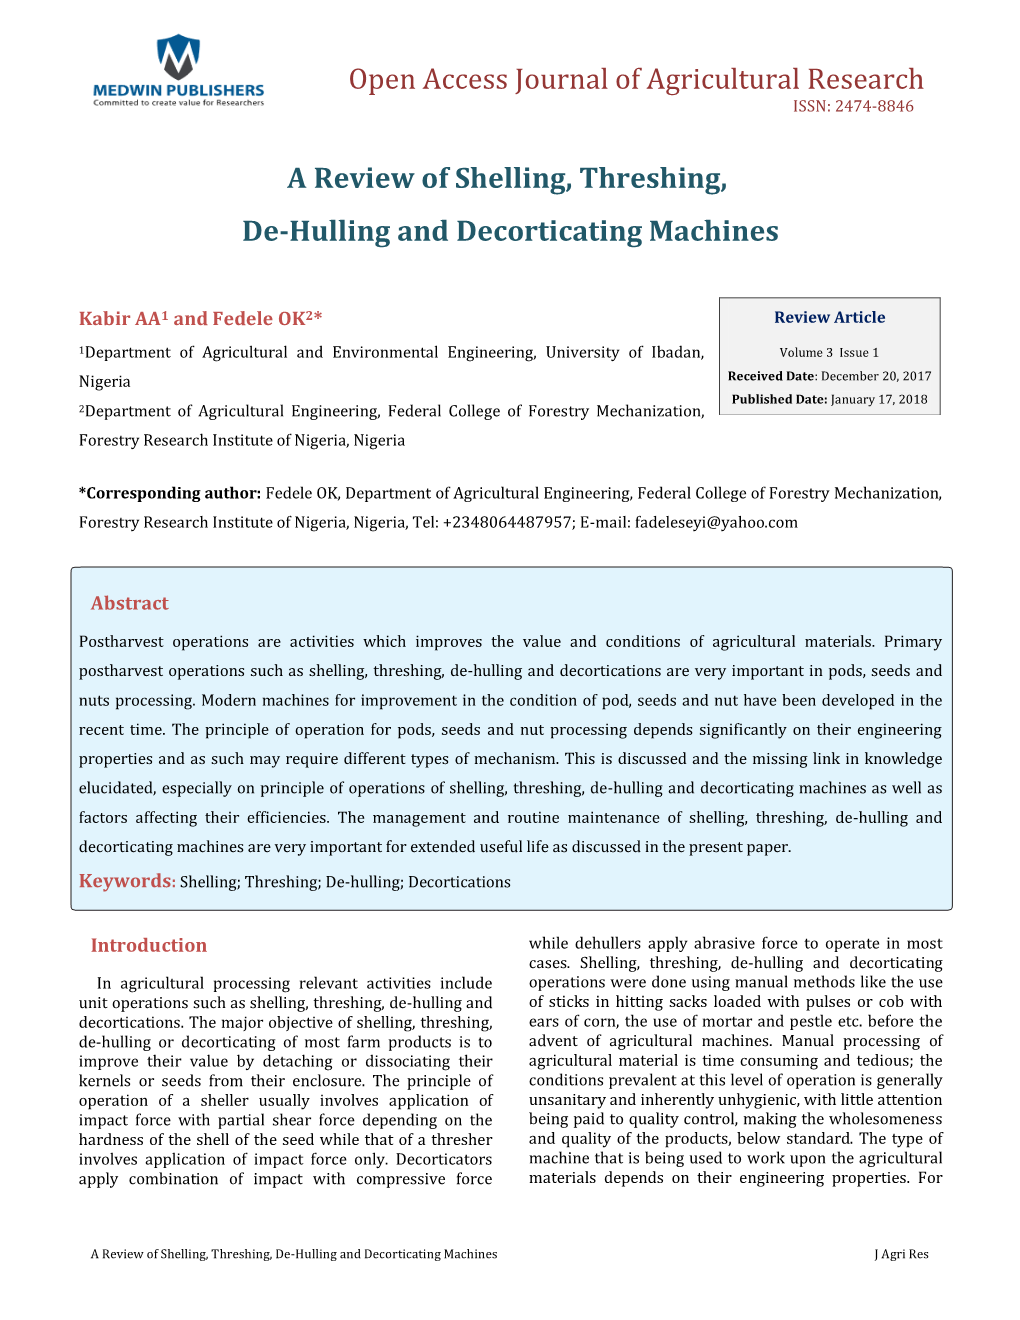 A Review of Shelling, Threshing, De-Hulling and Decorticating Machines